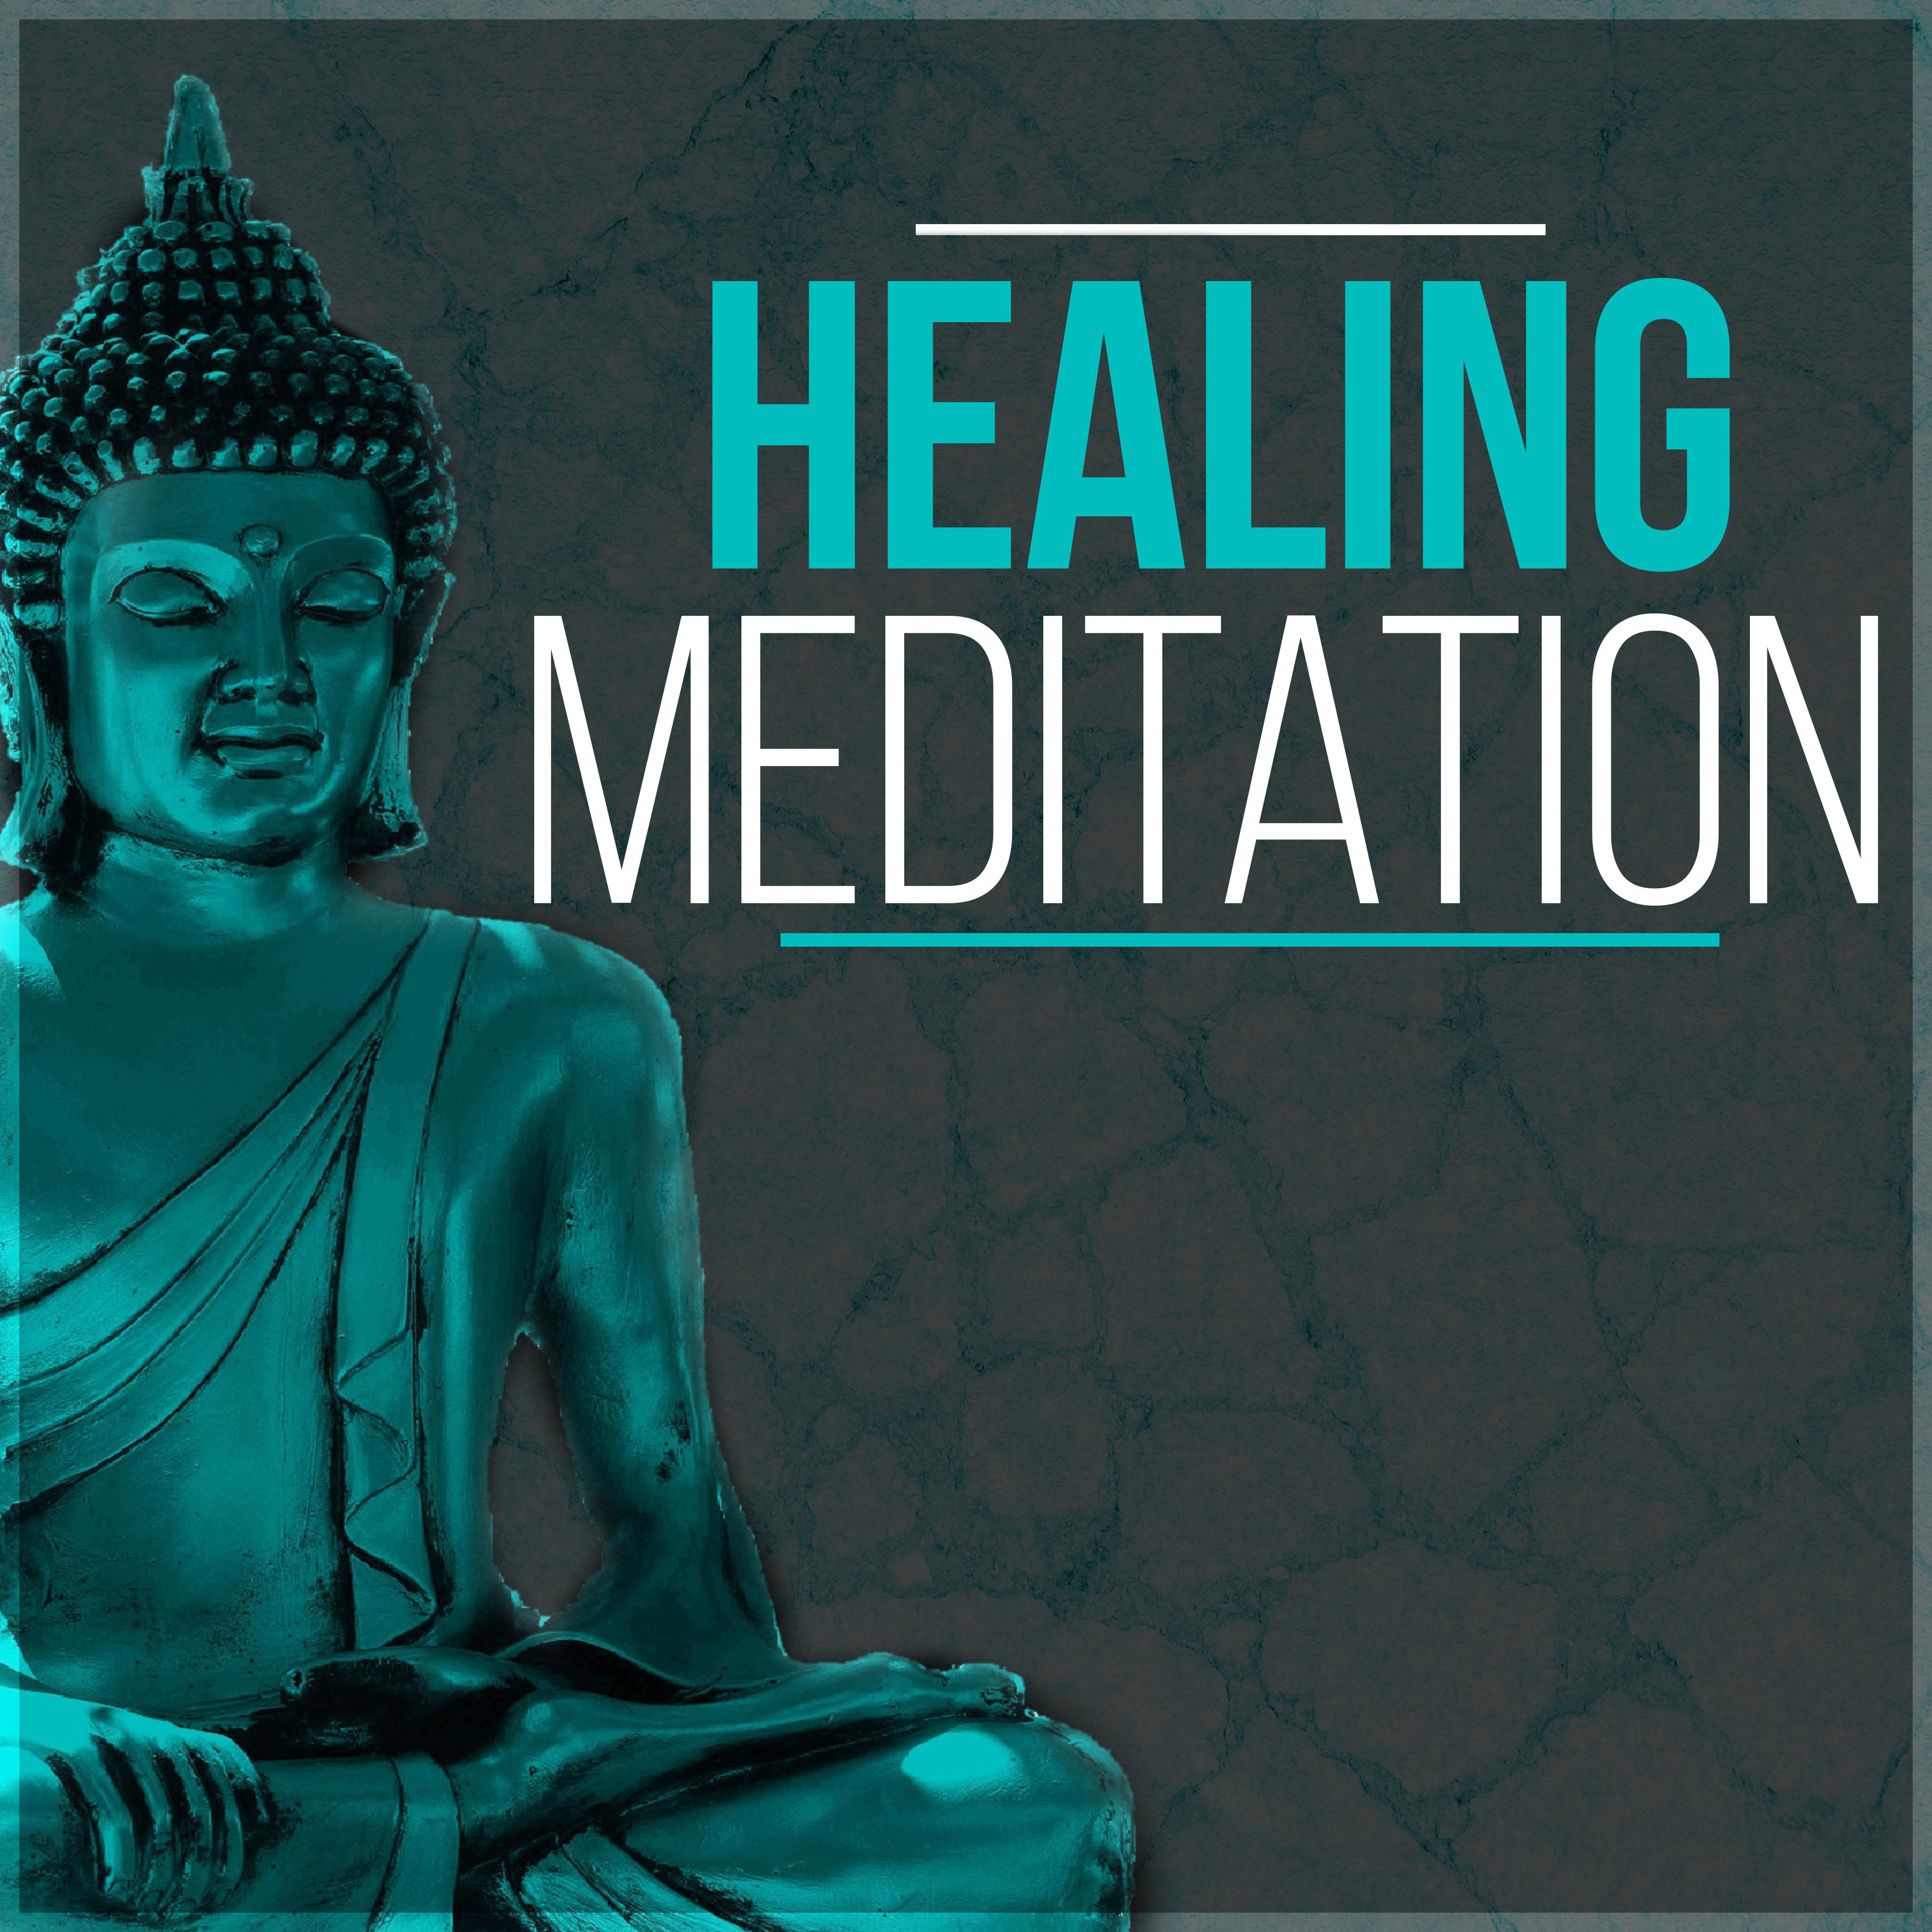 Healing Meditation - Music for Training and Meditation, Background Music for Massage Therapy, Soothing Spa Nature Relaxation